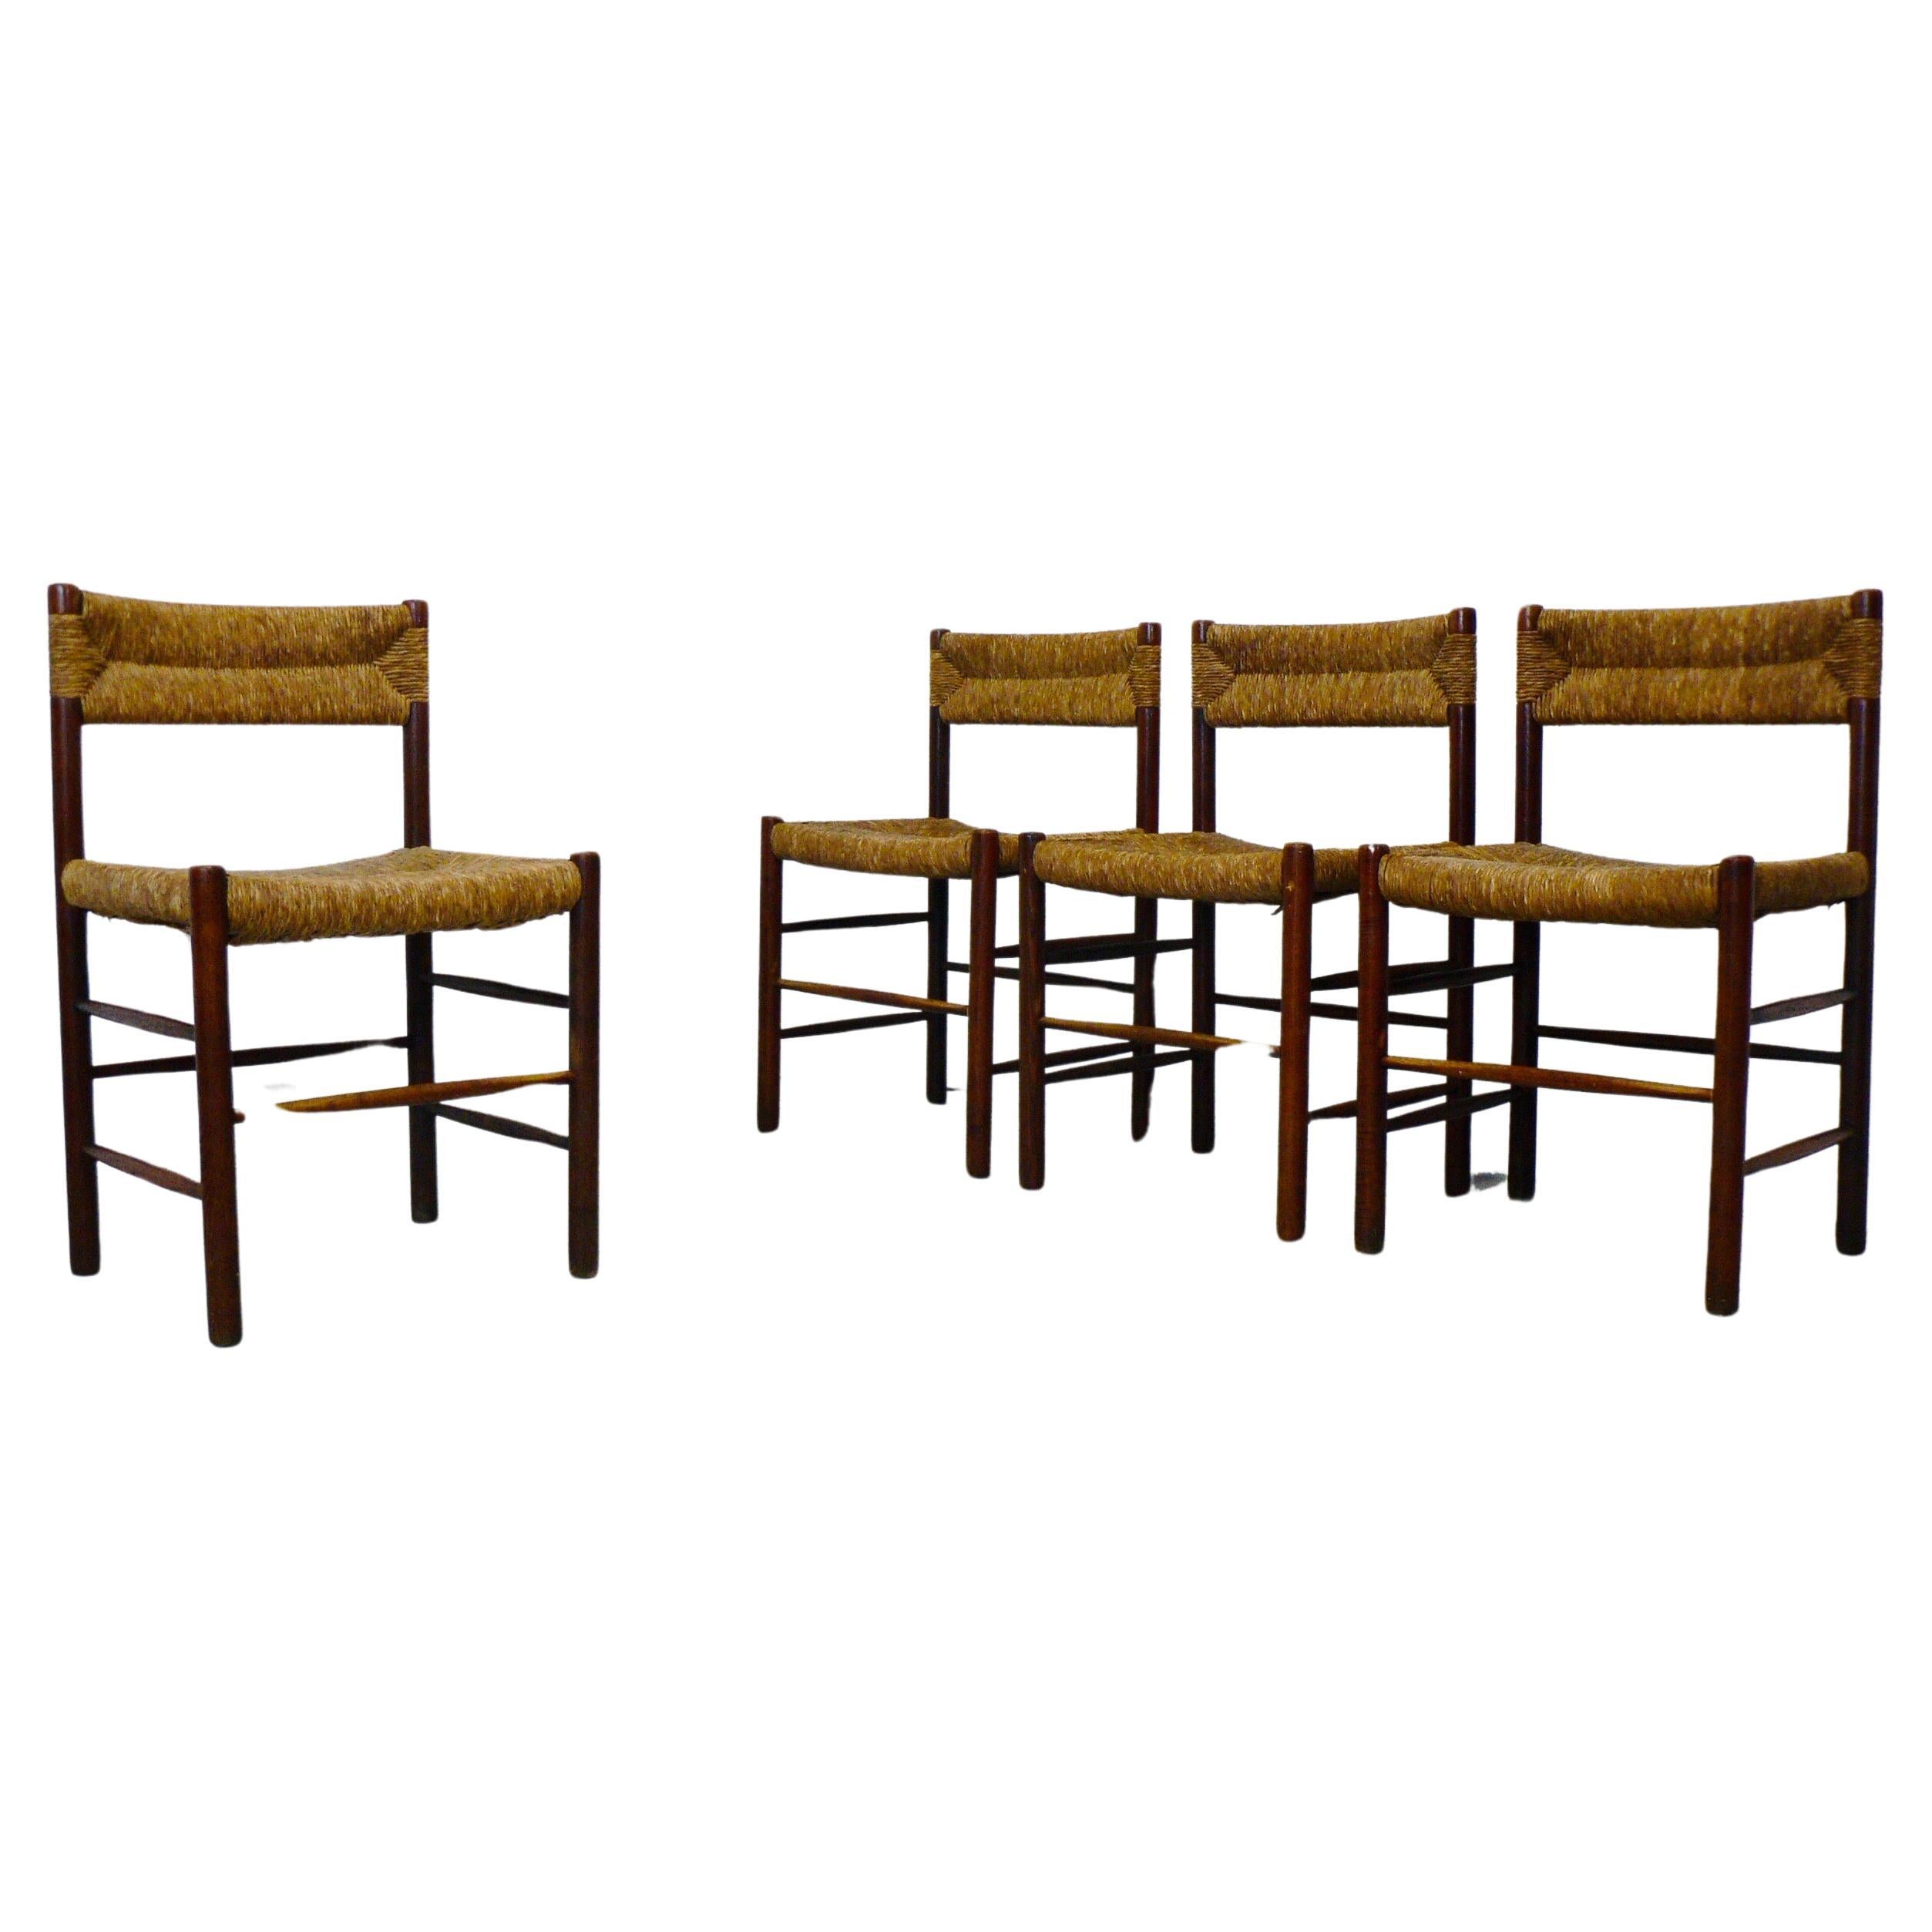 Set of four dining chairs designed by Robert Sentou for Sentou editions in the 1950s, and curated by Charlotte Perriand for various interior projects. 

The chairs feature a stained ashwood frame, consisting of sturdy, straight legs connected by